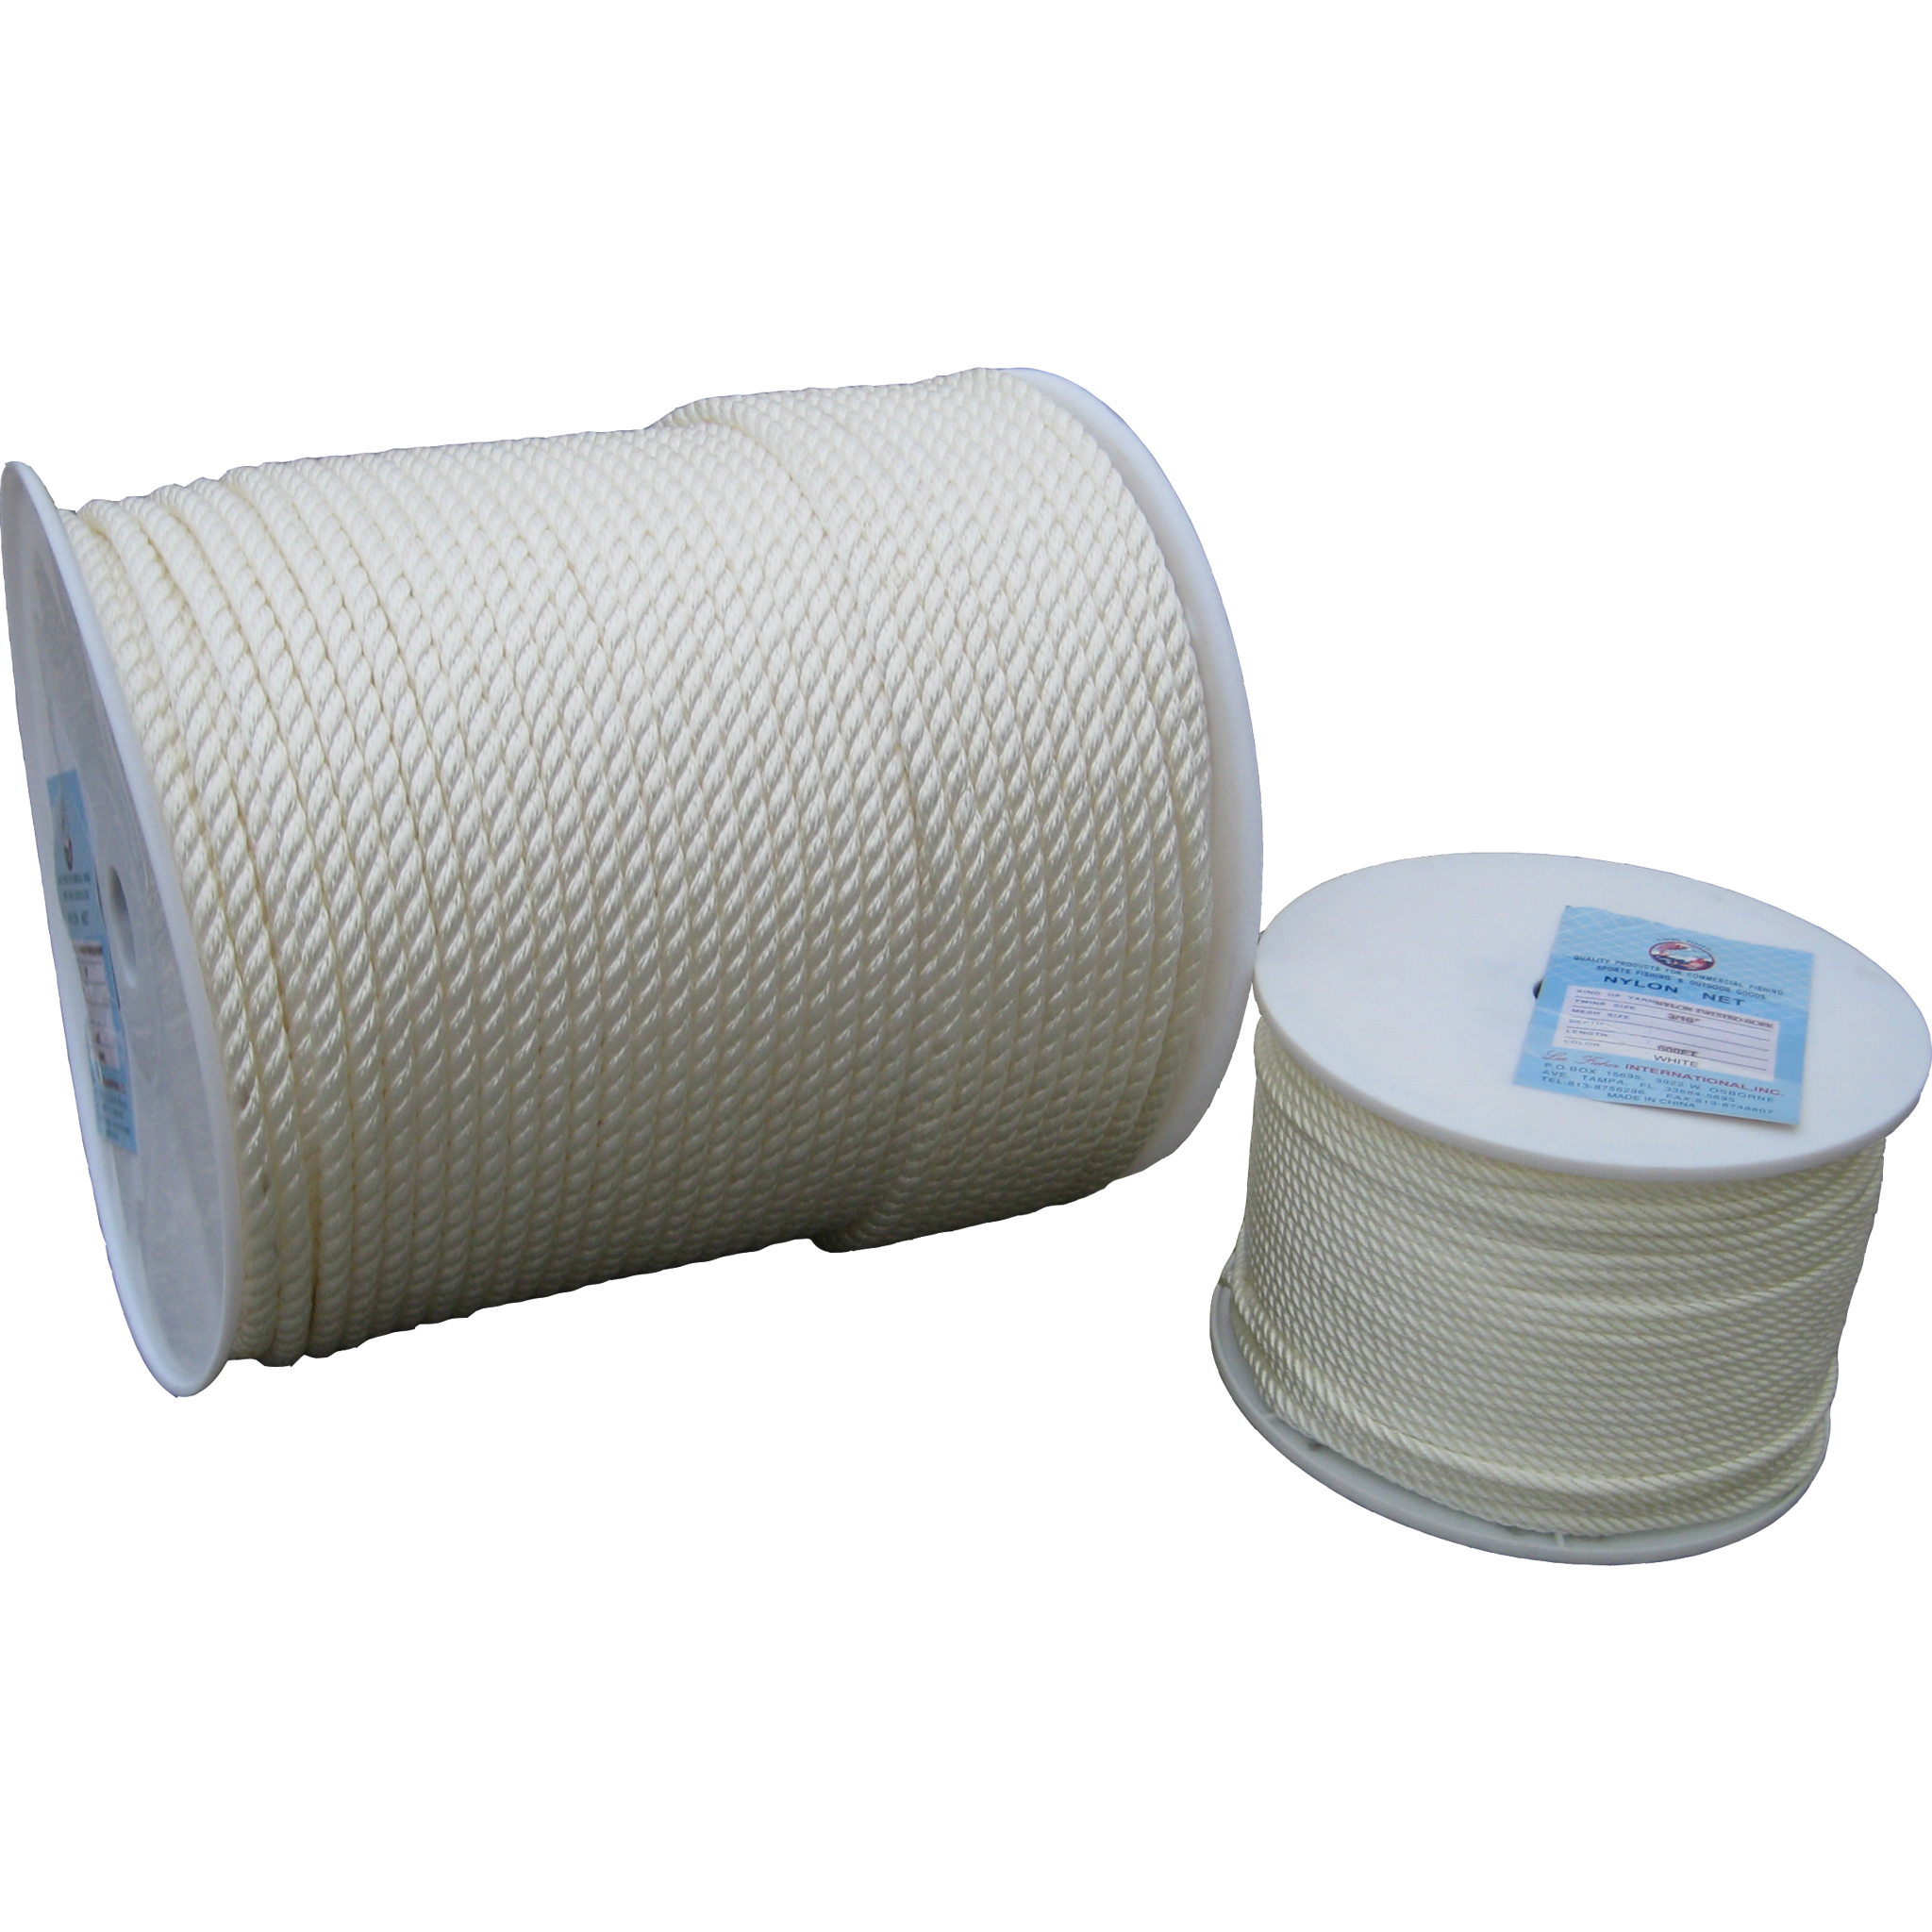 1/4 Inch x 600 Ft Three Strand Twisted Nylon Rope Spool for Boats